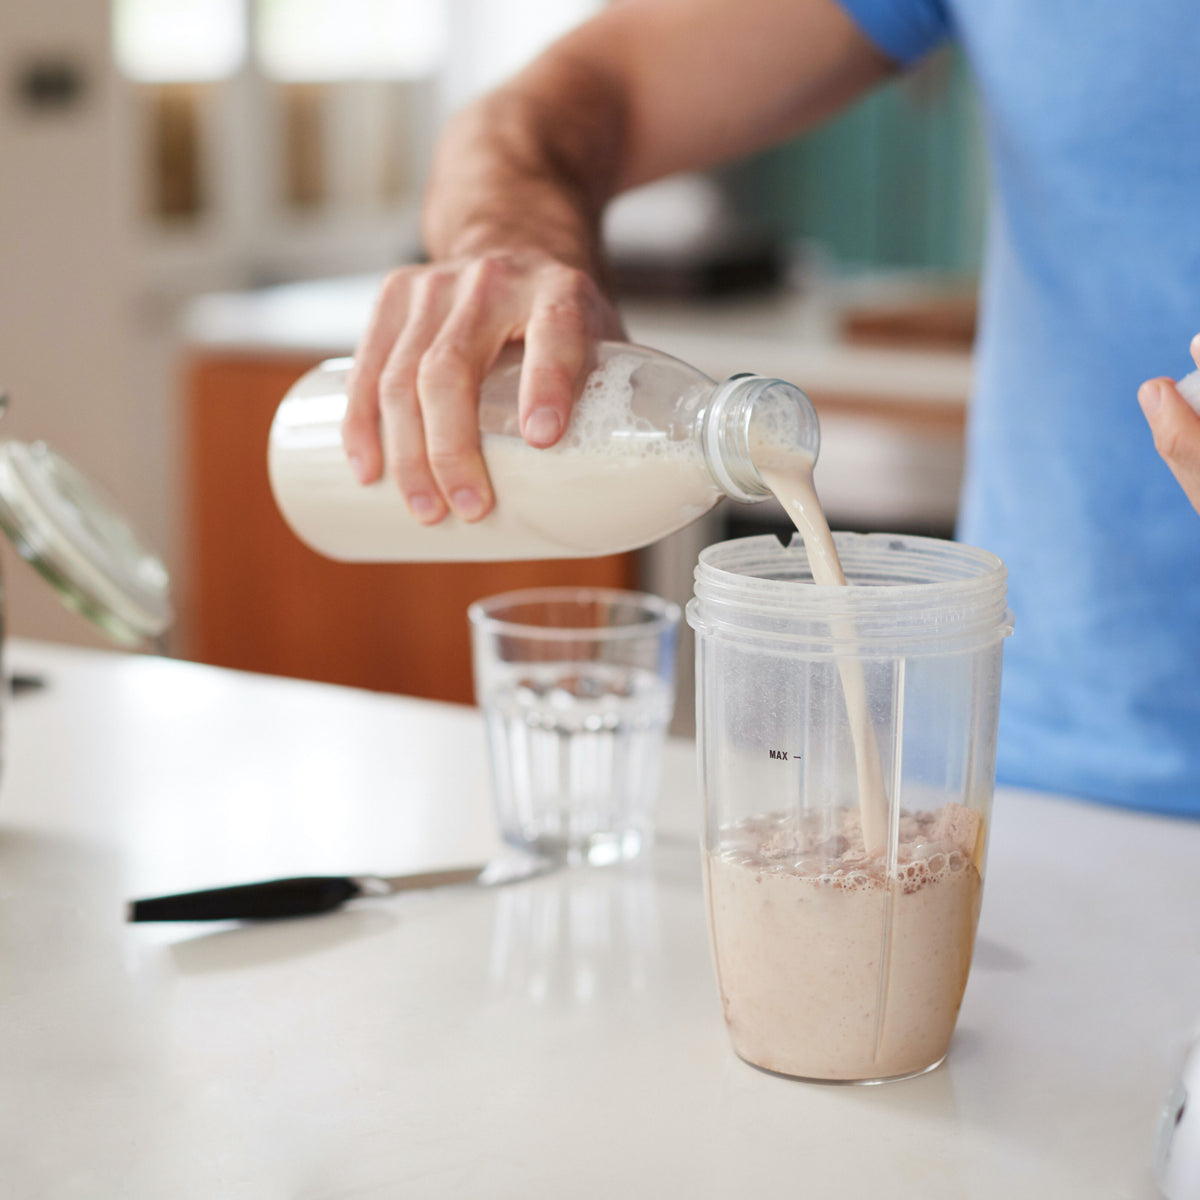 I use a milk frother to turn 8oz of almond milk and protein powder